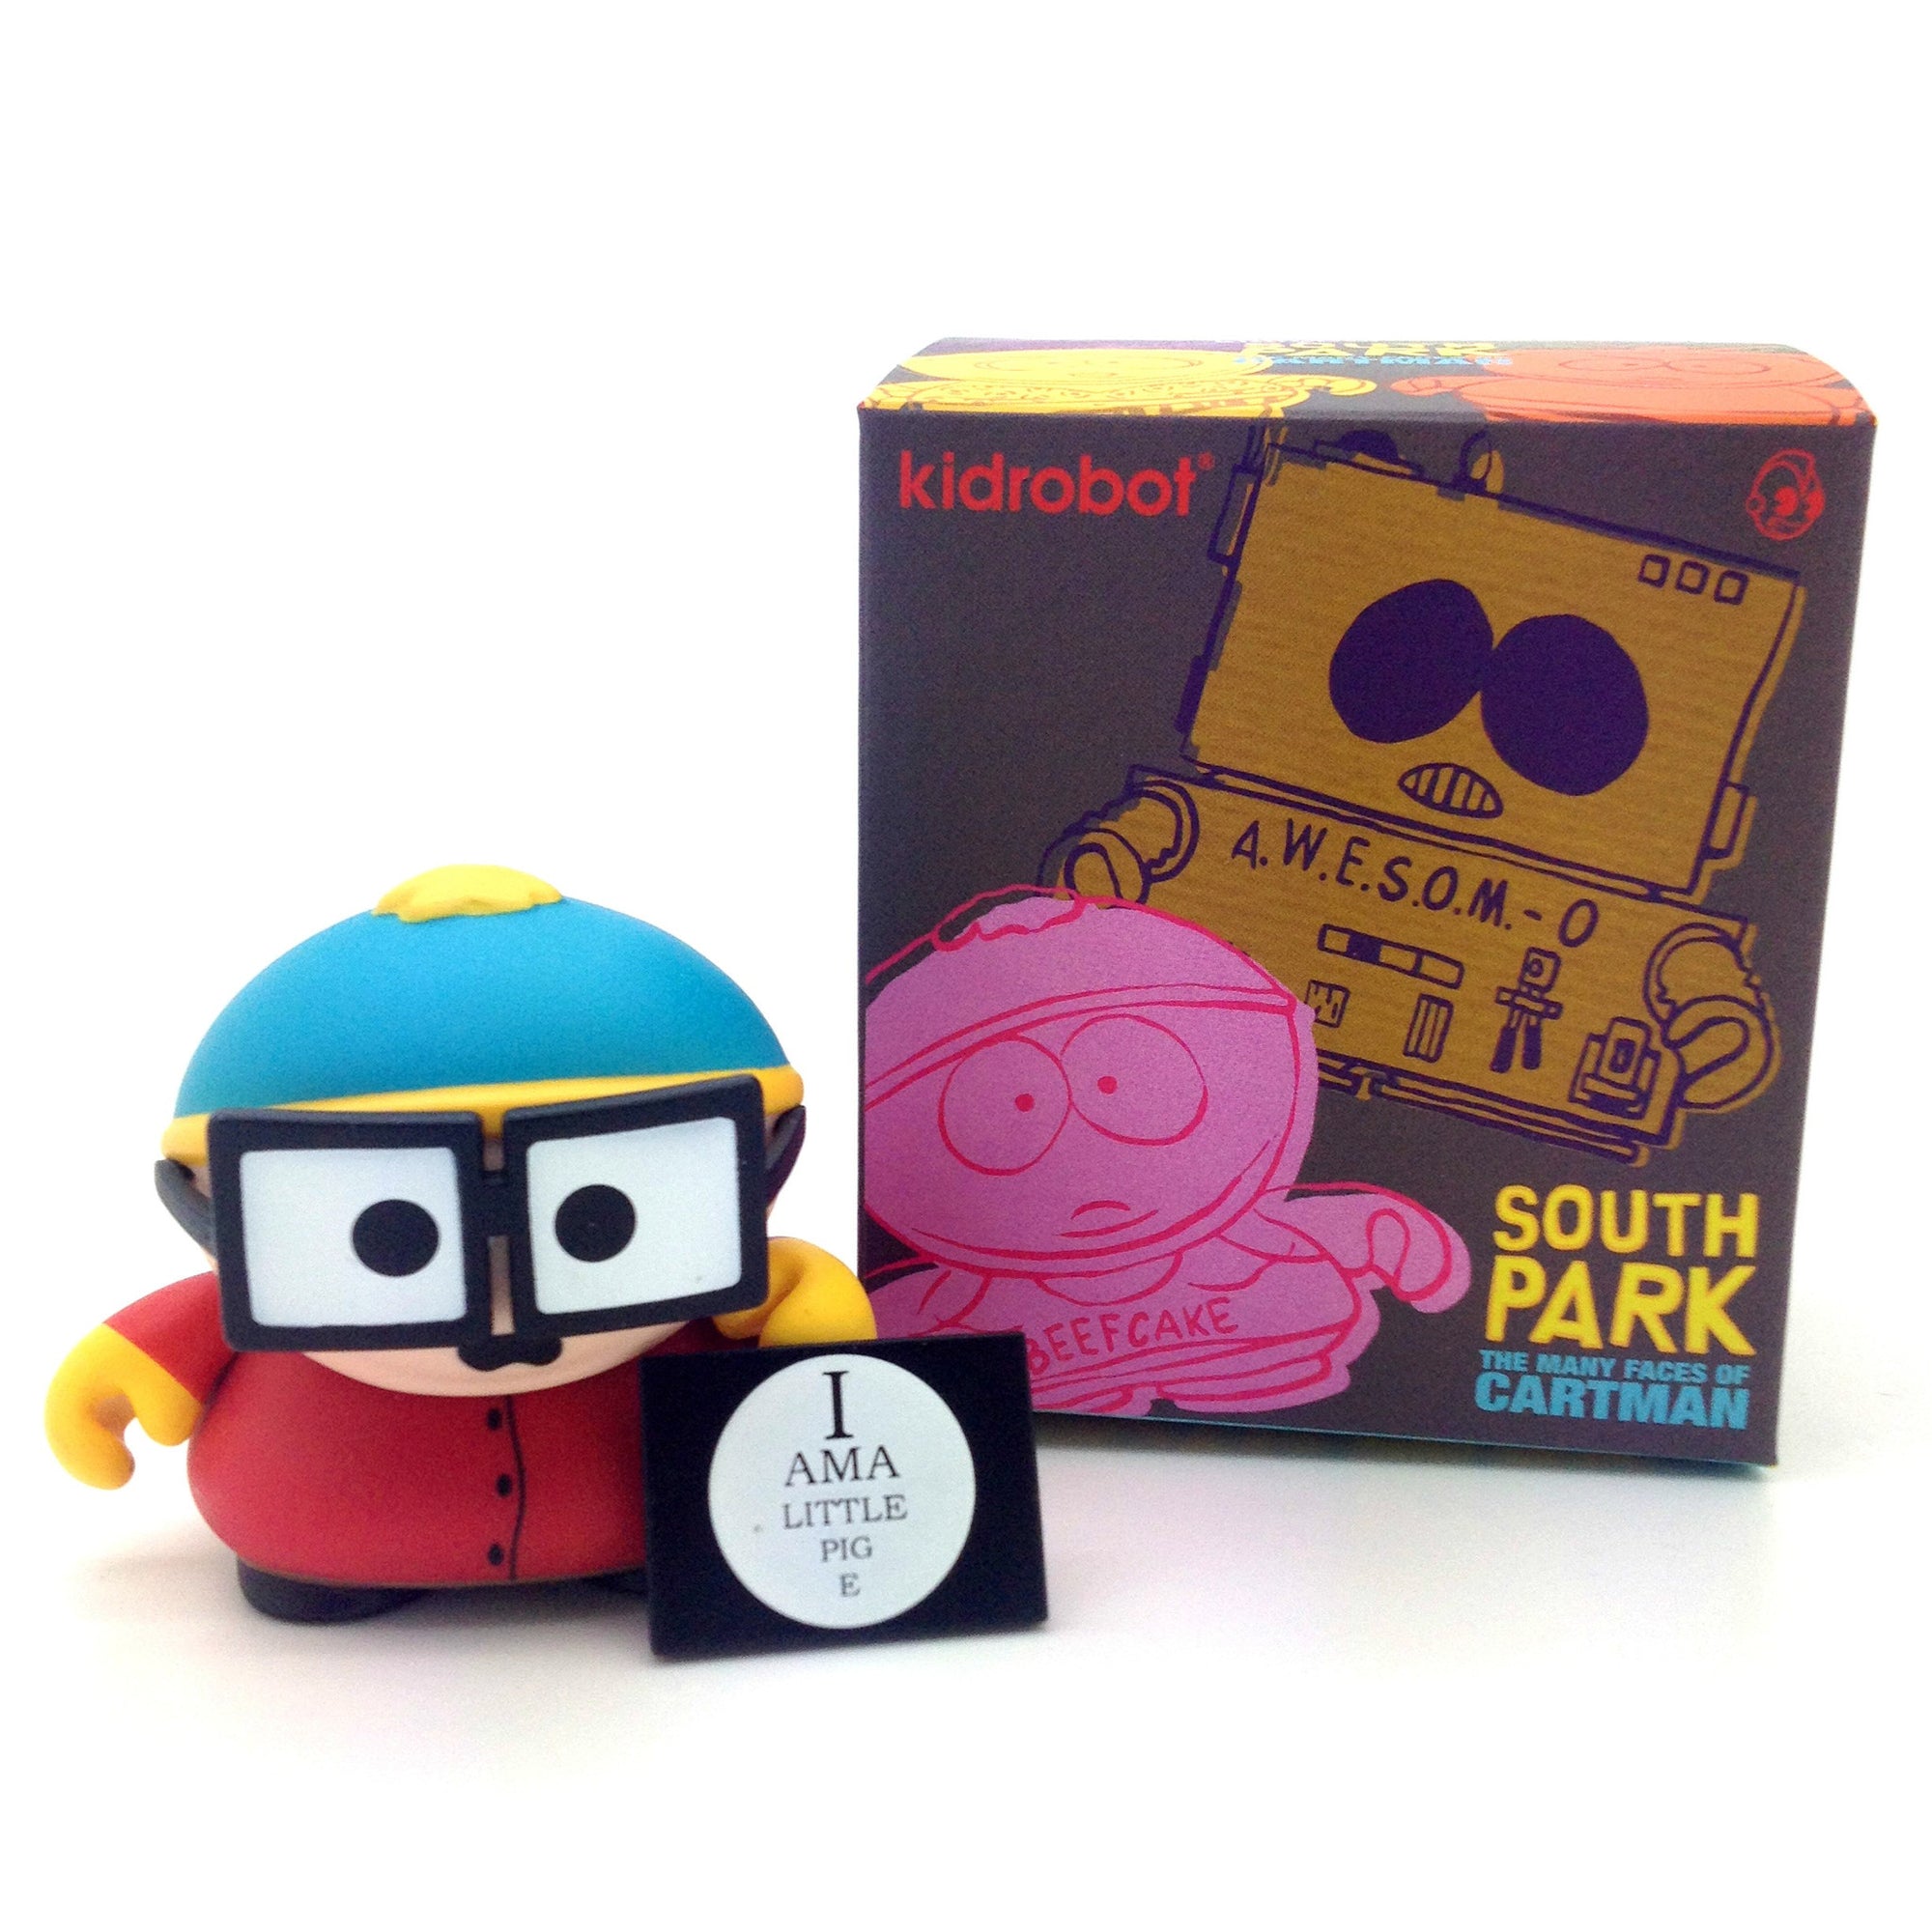 South Park The Many Faces of Cartman Blind Box - Piggy - Mindzai
 - 1